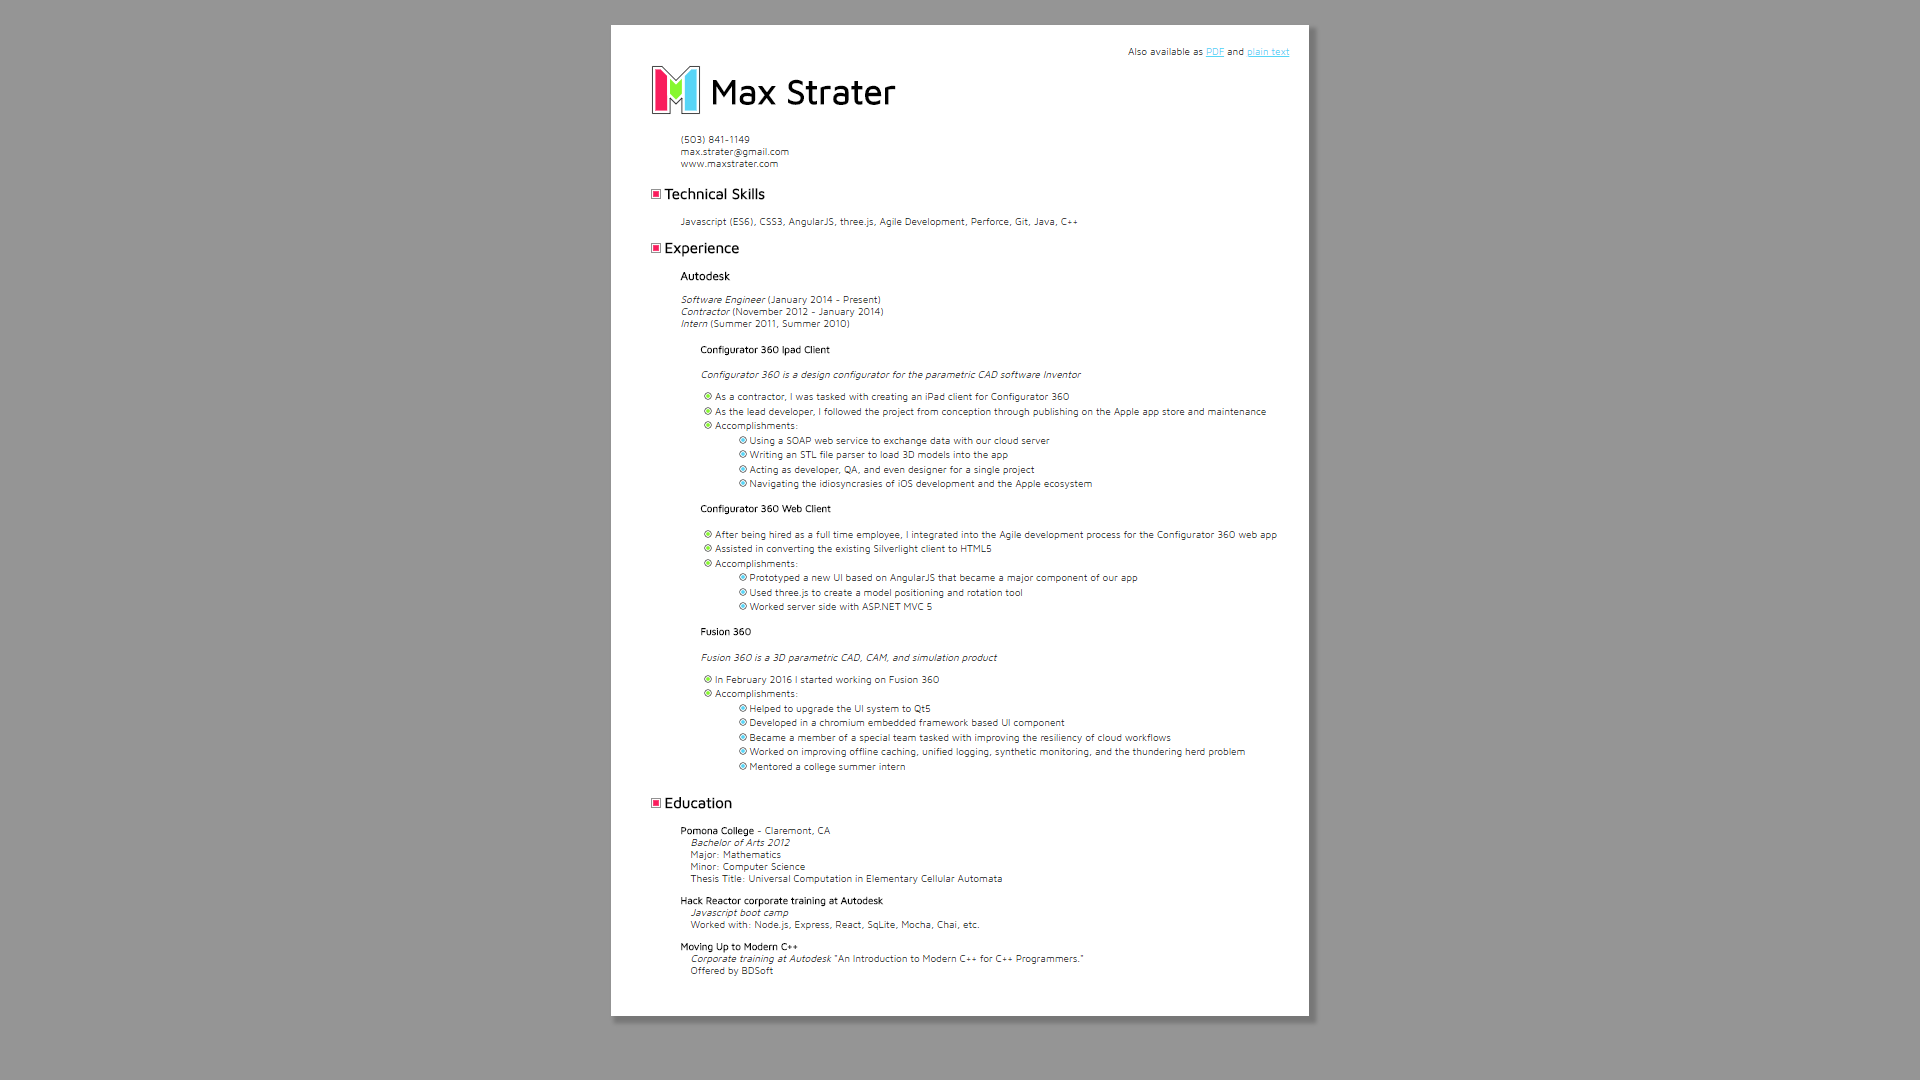 Link to Max Strater's resume